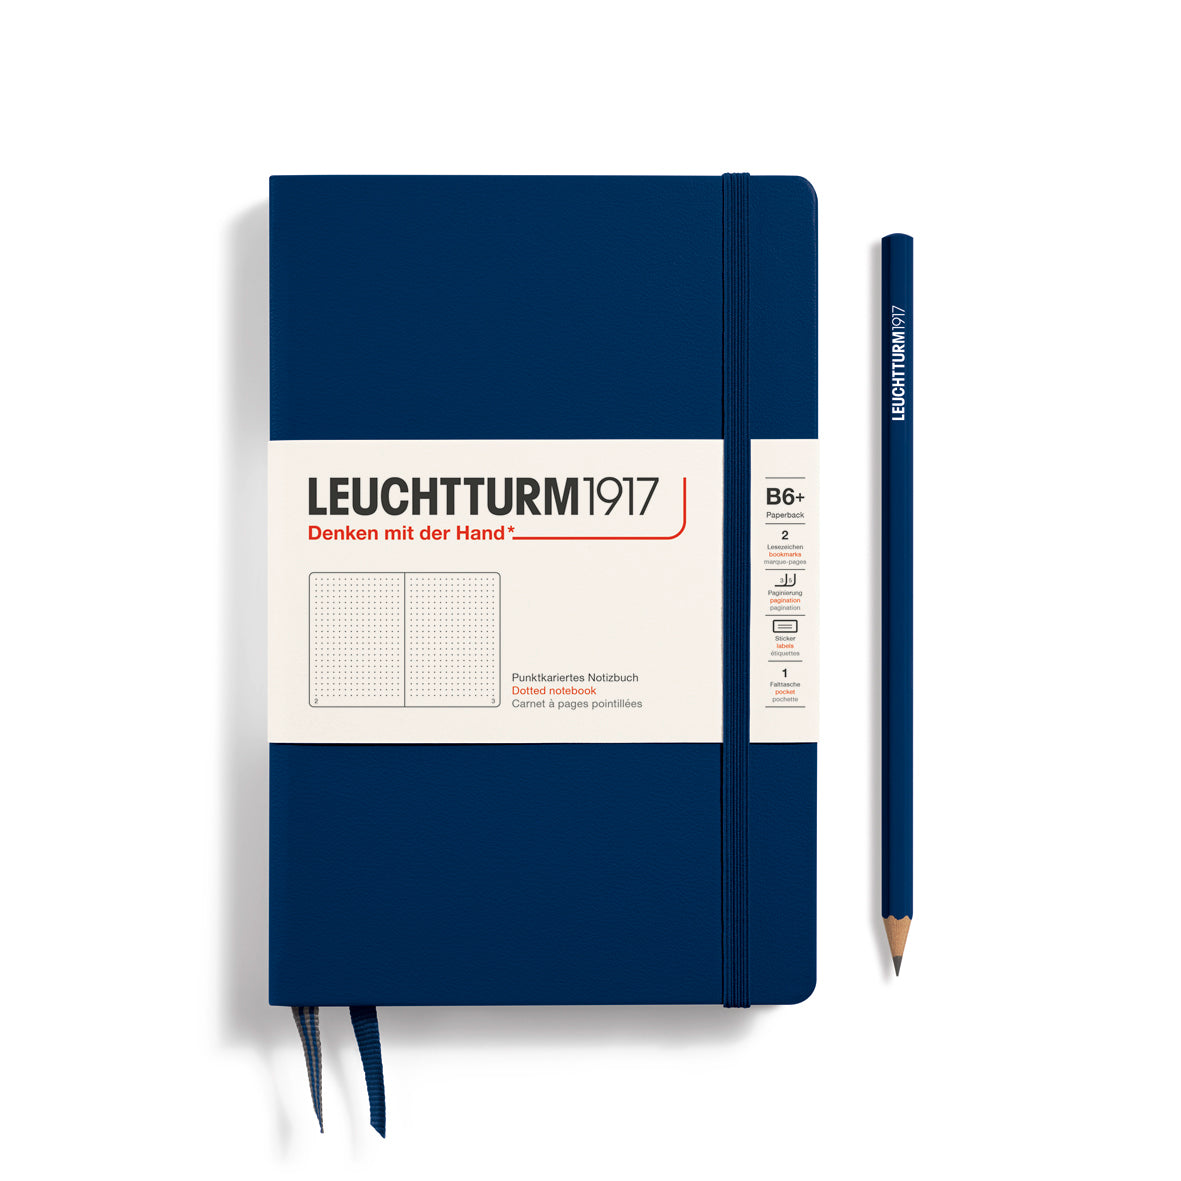 Leuchtturm1917 Hardcover Paperback (B6+) Dotted, Navy - Blesket Canada